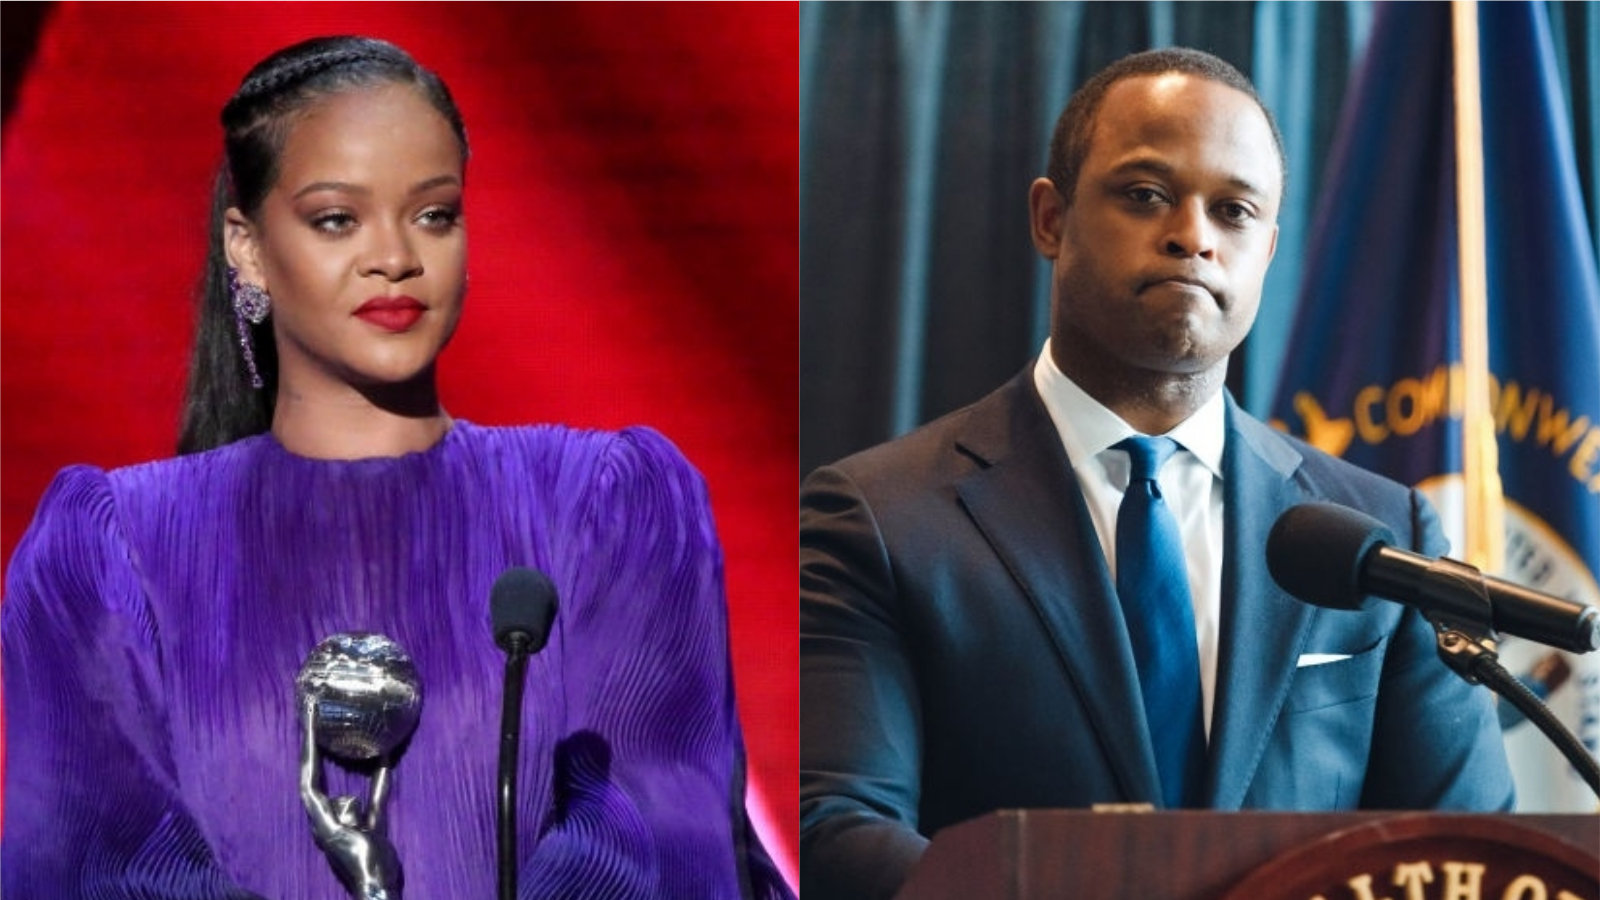 Rihanna Wonderfully Takes Aim At Daniel Cameron On Instagram: 'Let This Sink Into Your Hollow Skull'